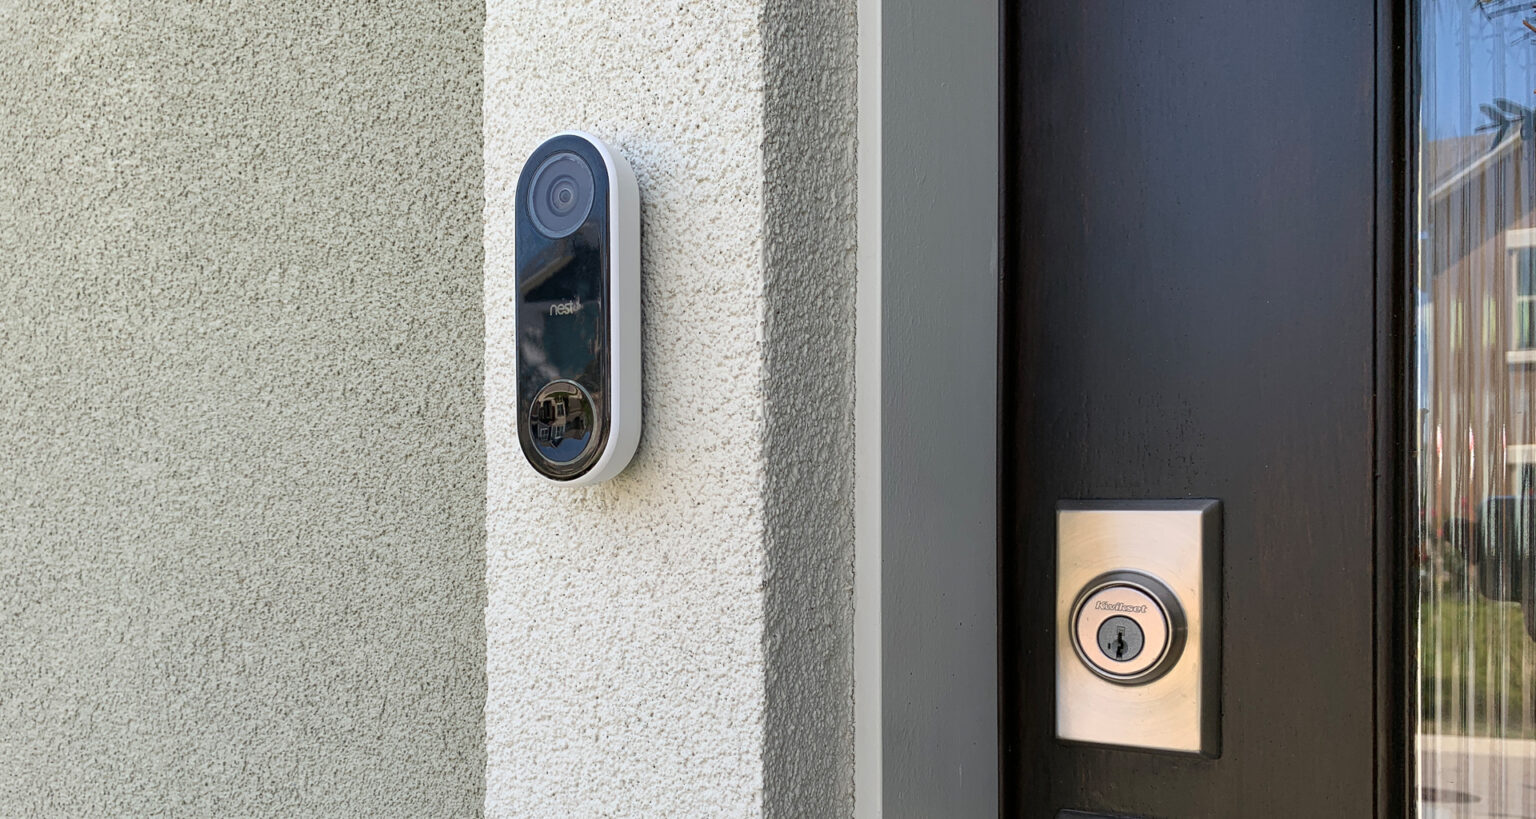 A Google Nest Hello video doorbell installation powered by a Ninety7 Indoor Power Adapter. Image: Digitized House.